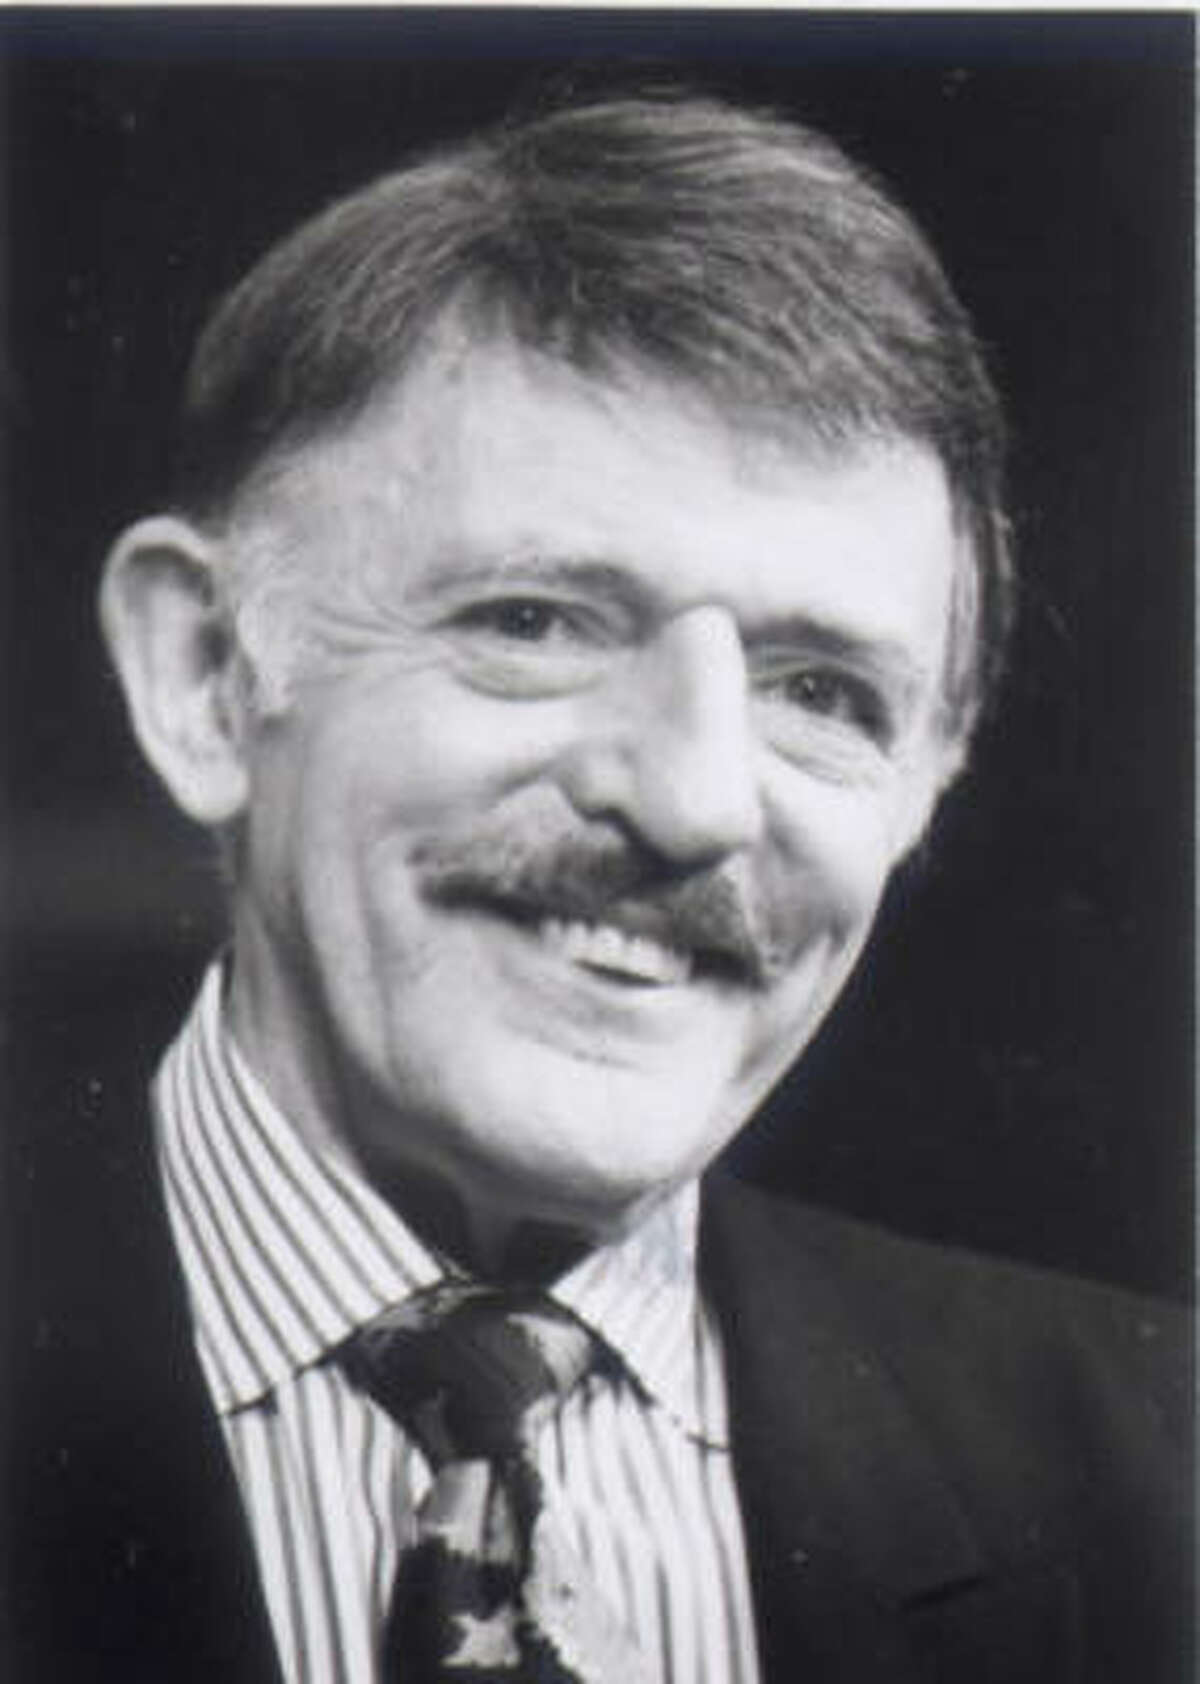 John Astin played Gomez in The Addams Family.